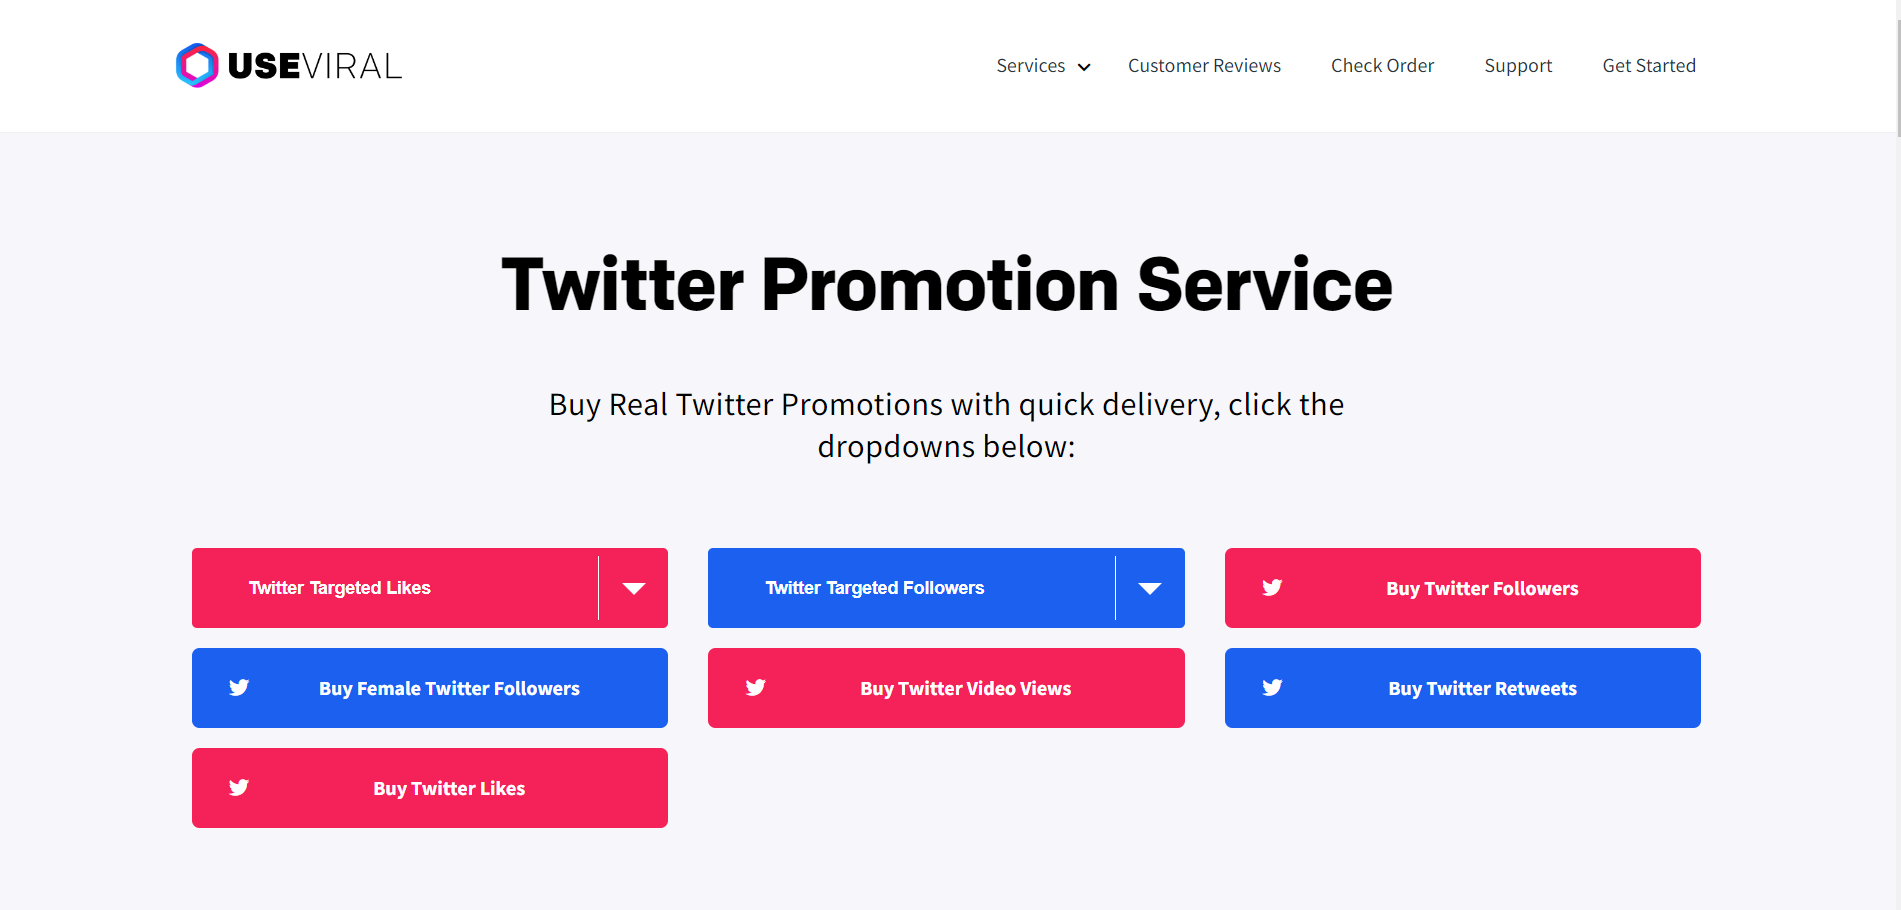 how to buy twitter followers